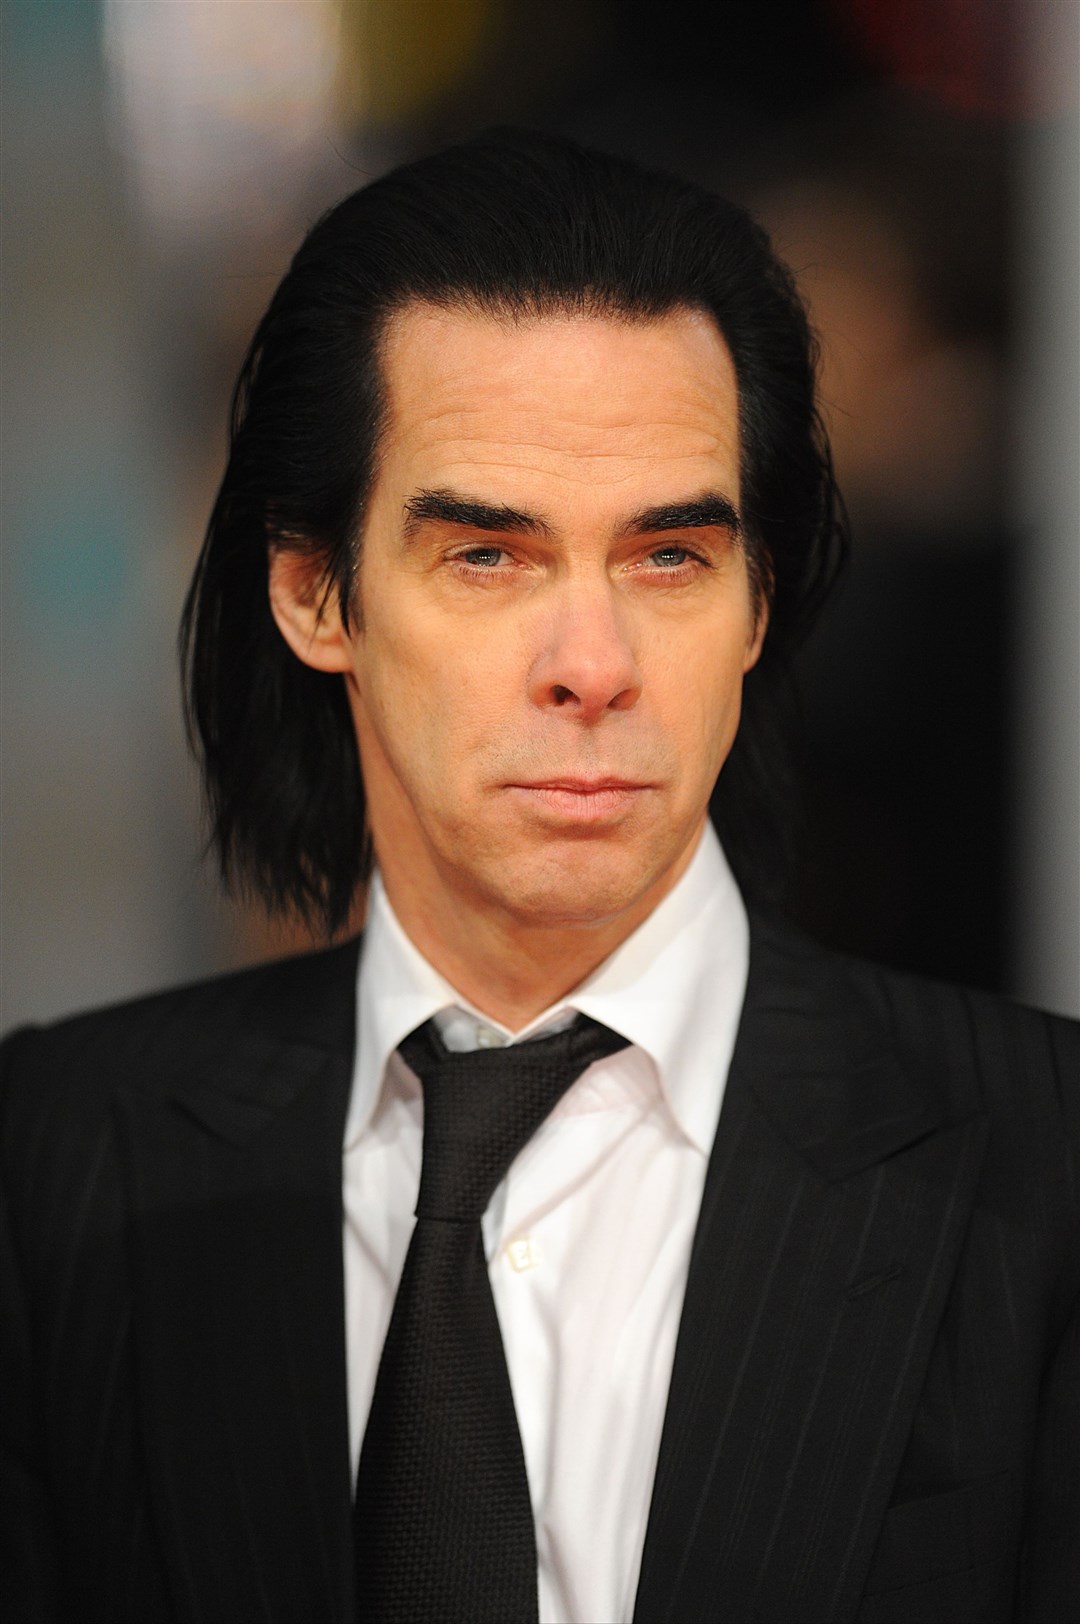 Nick Cave said it was an “absolute honour” to be elected as an RSL fellow (Matt Crossick/PA)